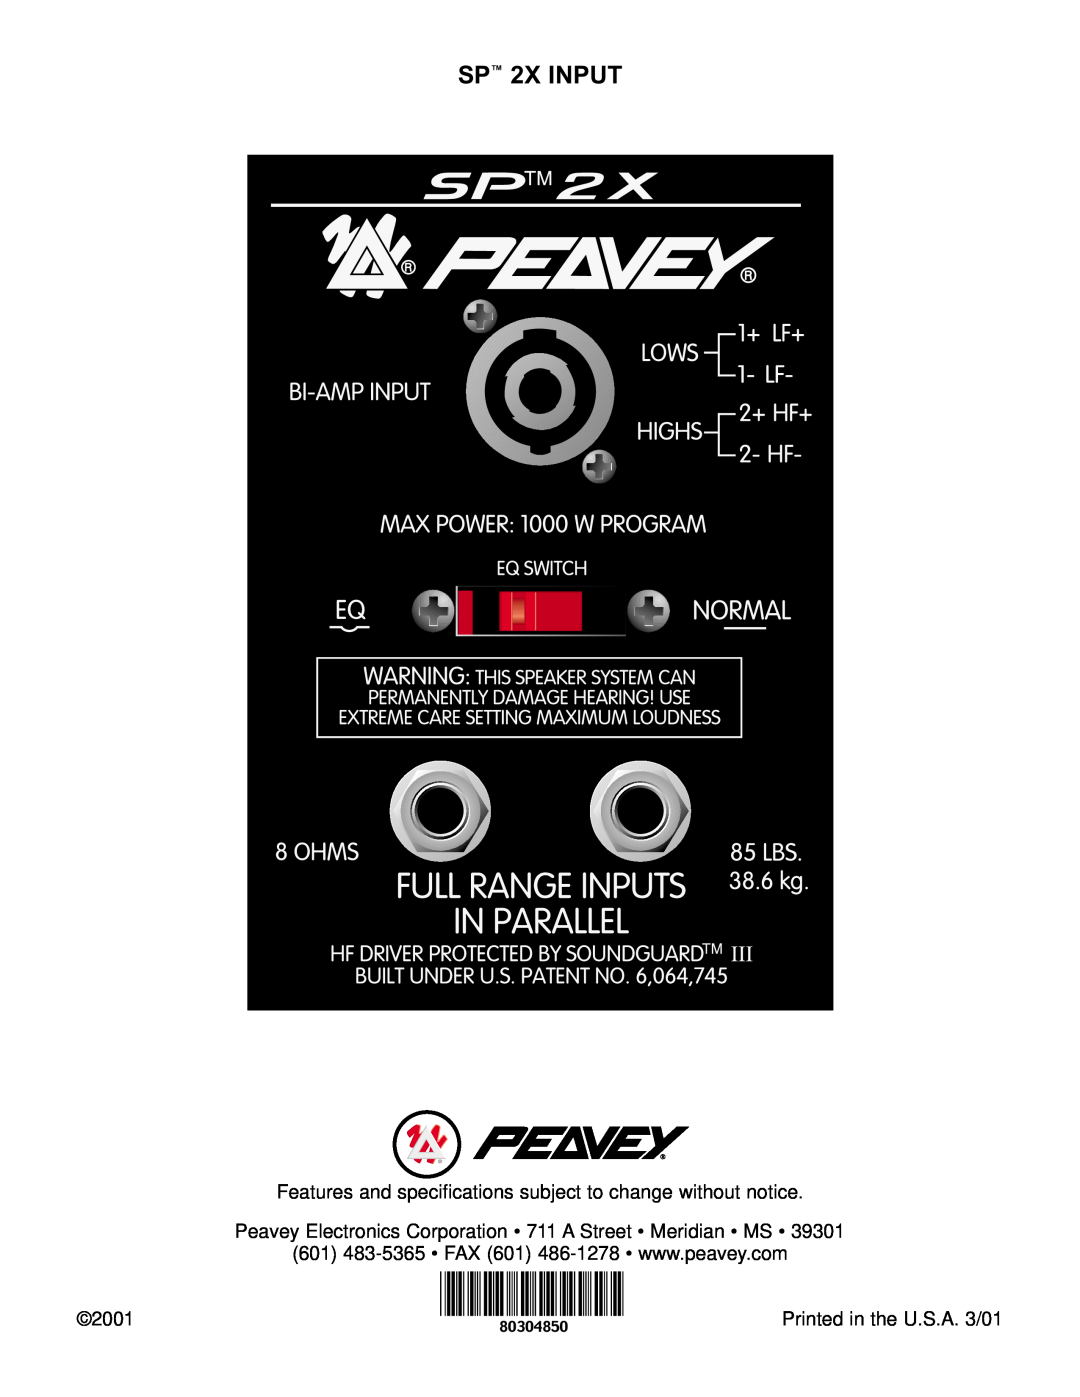 Peavey SP 2X INPUT, Features and specifications subject to change without notice, 2001 